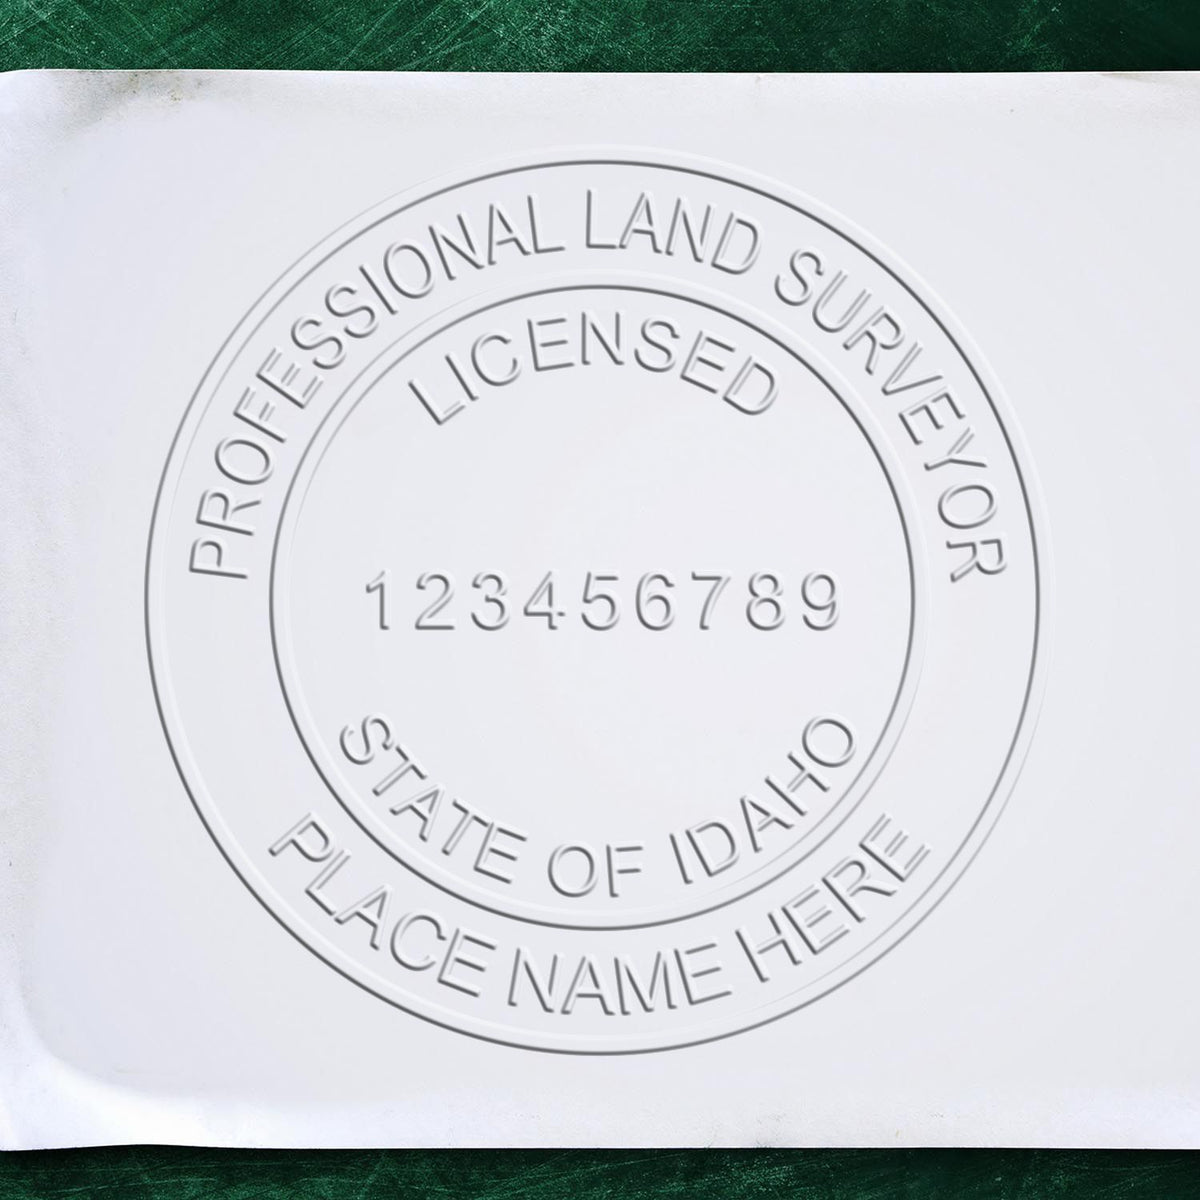 The Long Reach Idaho Land Surveyor Seal stamp impression comes to life with a crisp, detailed photo on paper - showcasing true professional quality.